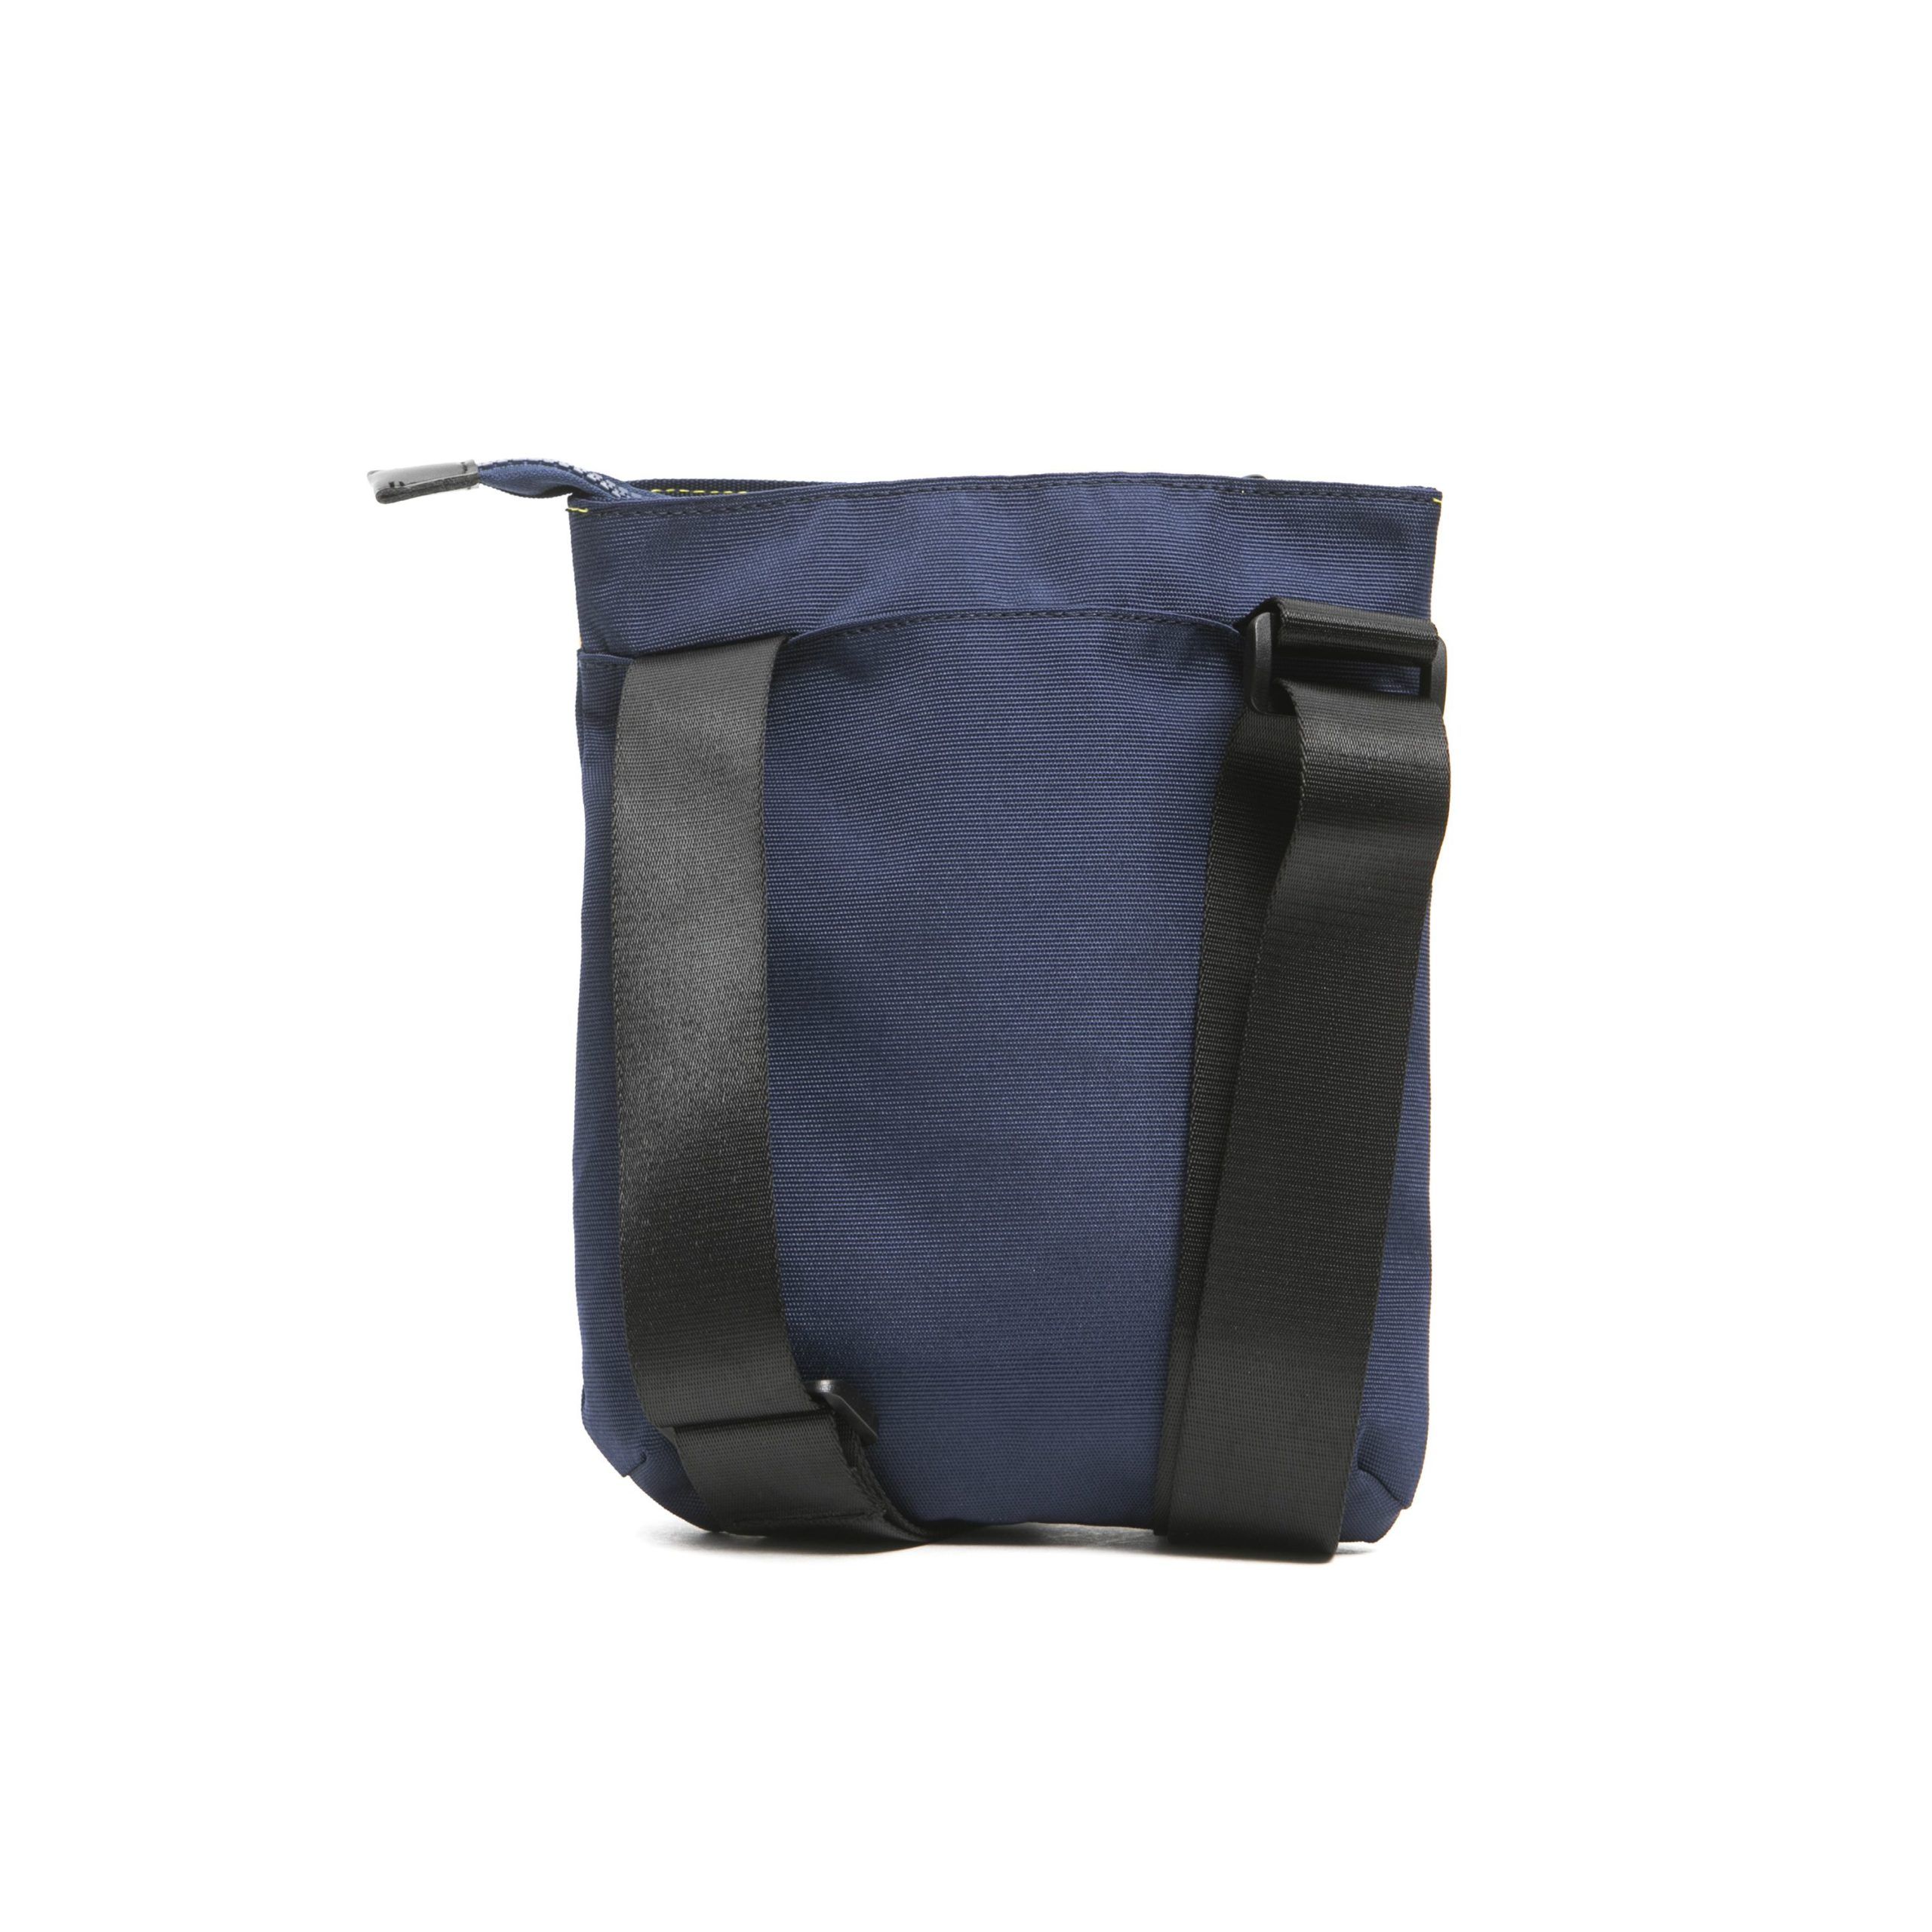 Sleek Blue Satchel with Front Pocket and Strap